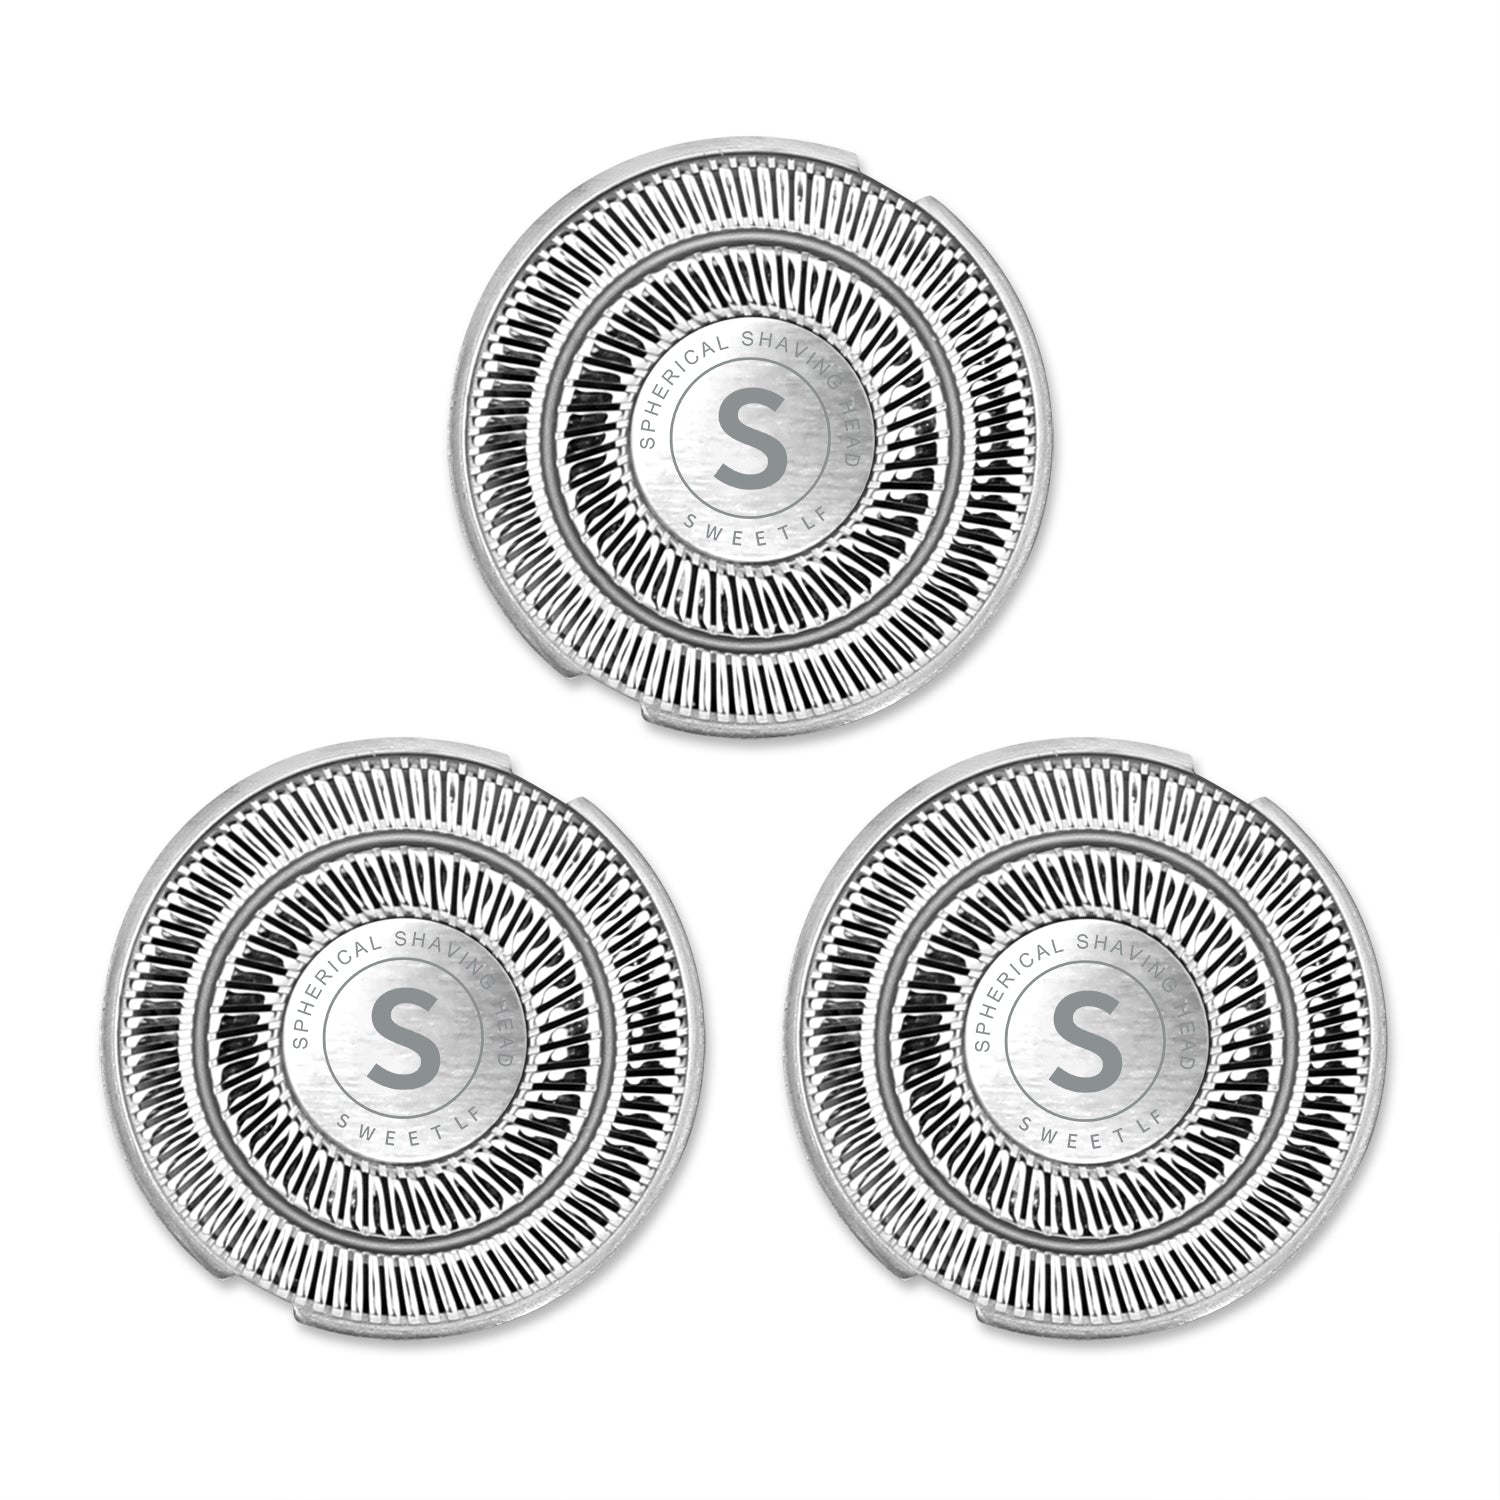 UCN601 replacement blades